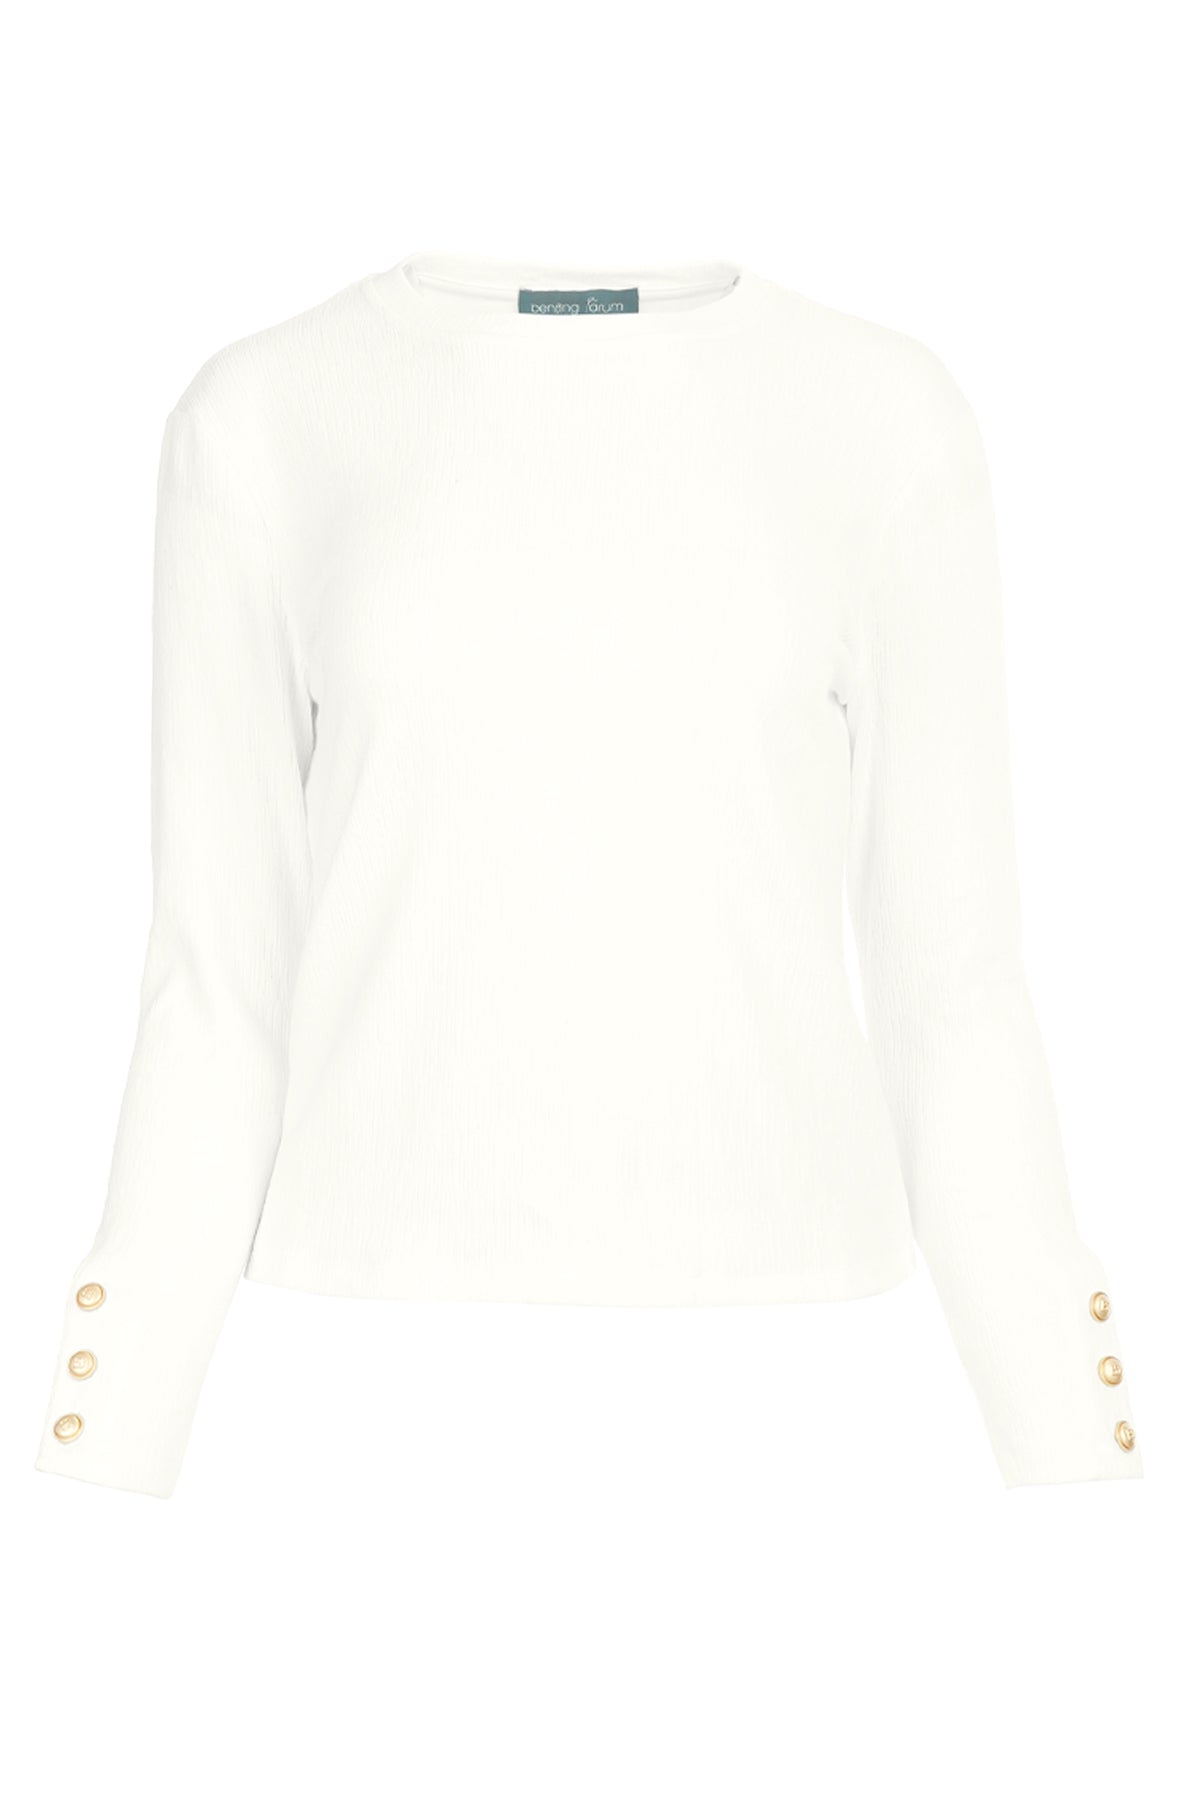 Textured Knit Top - White